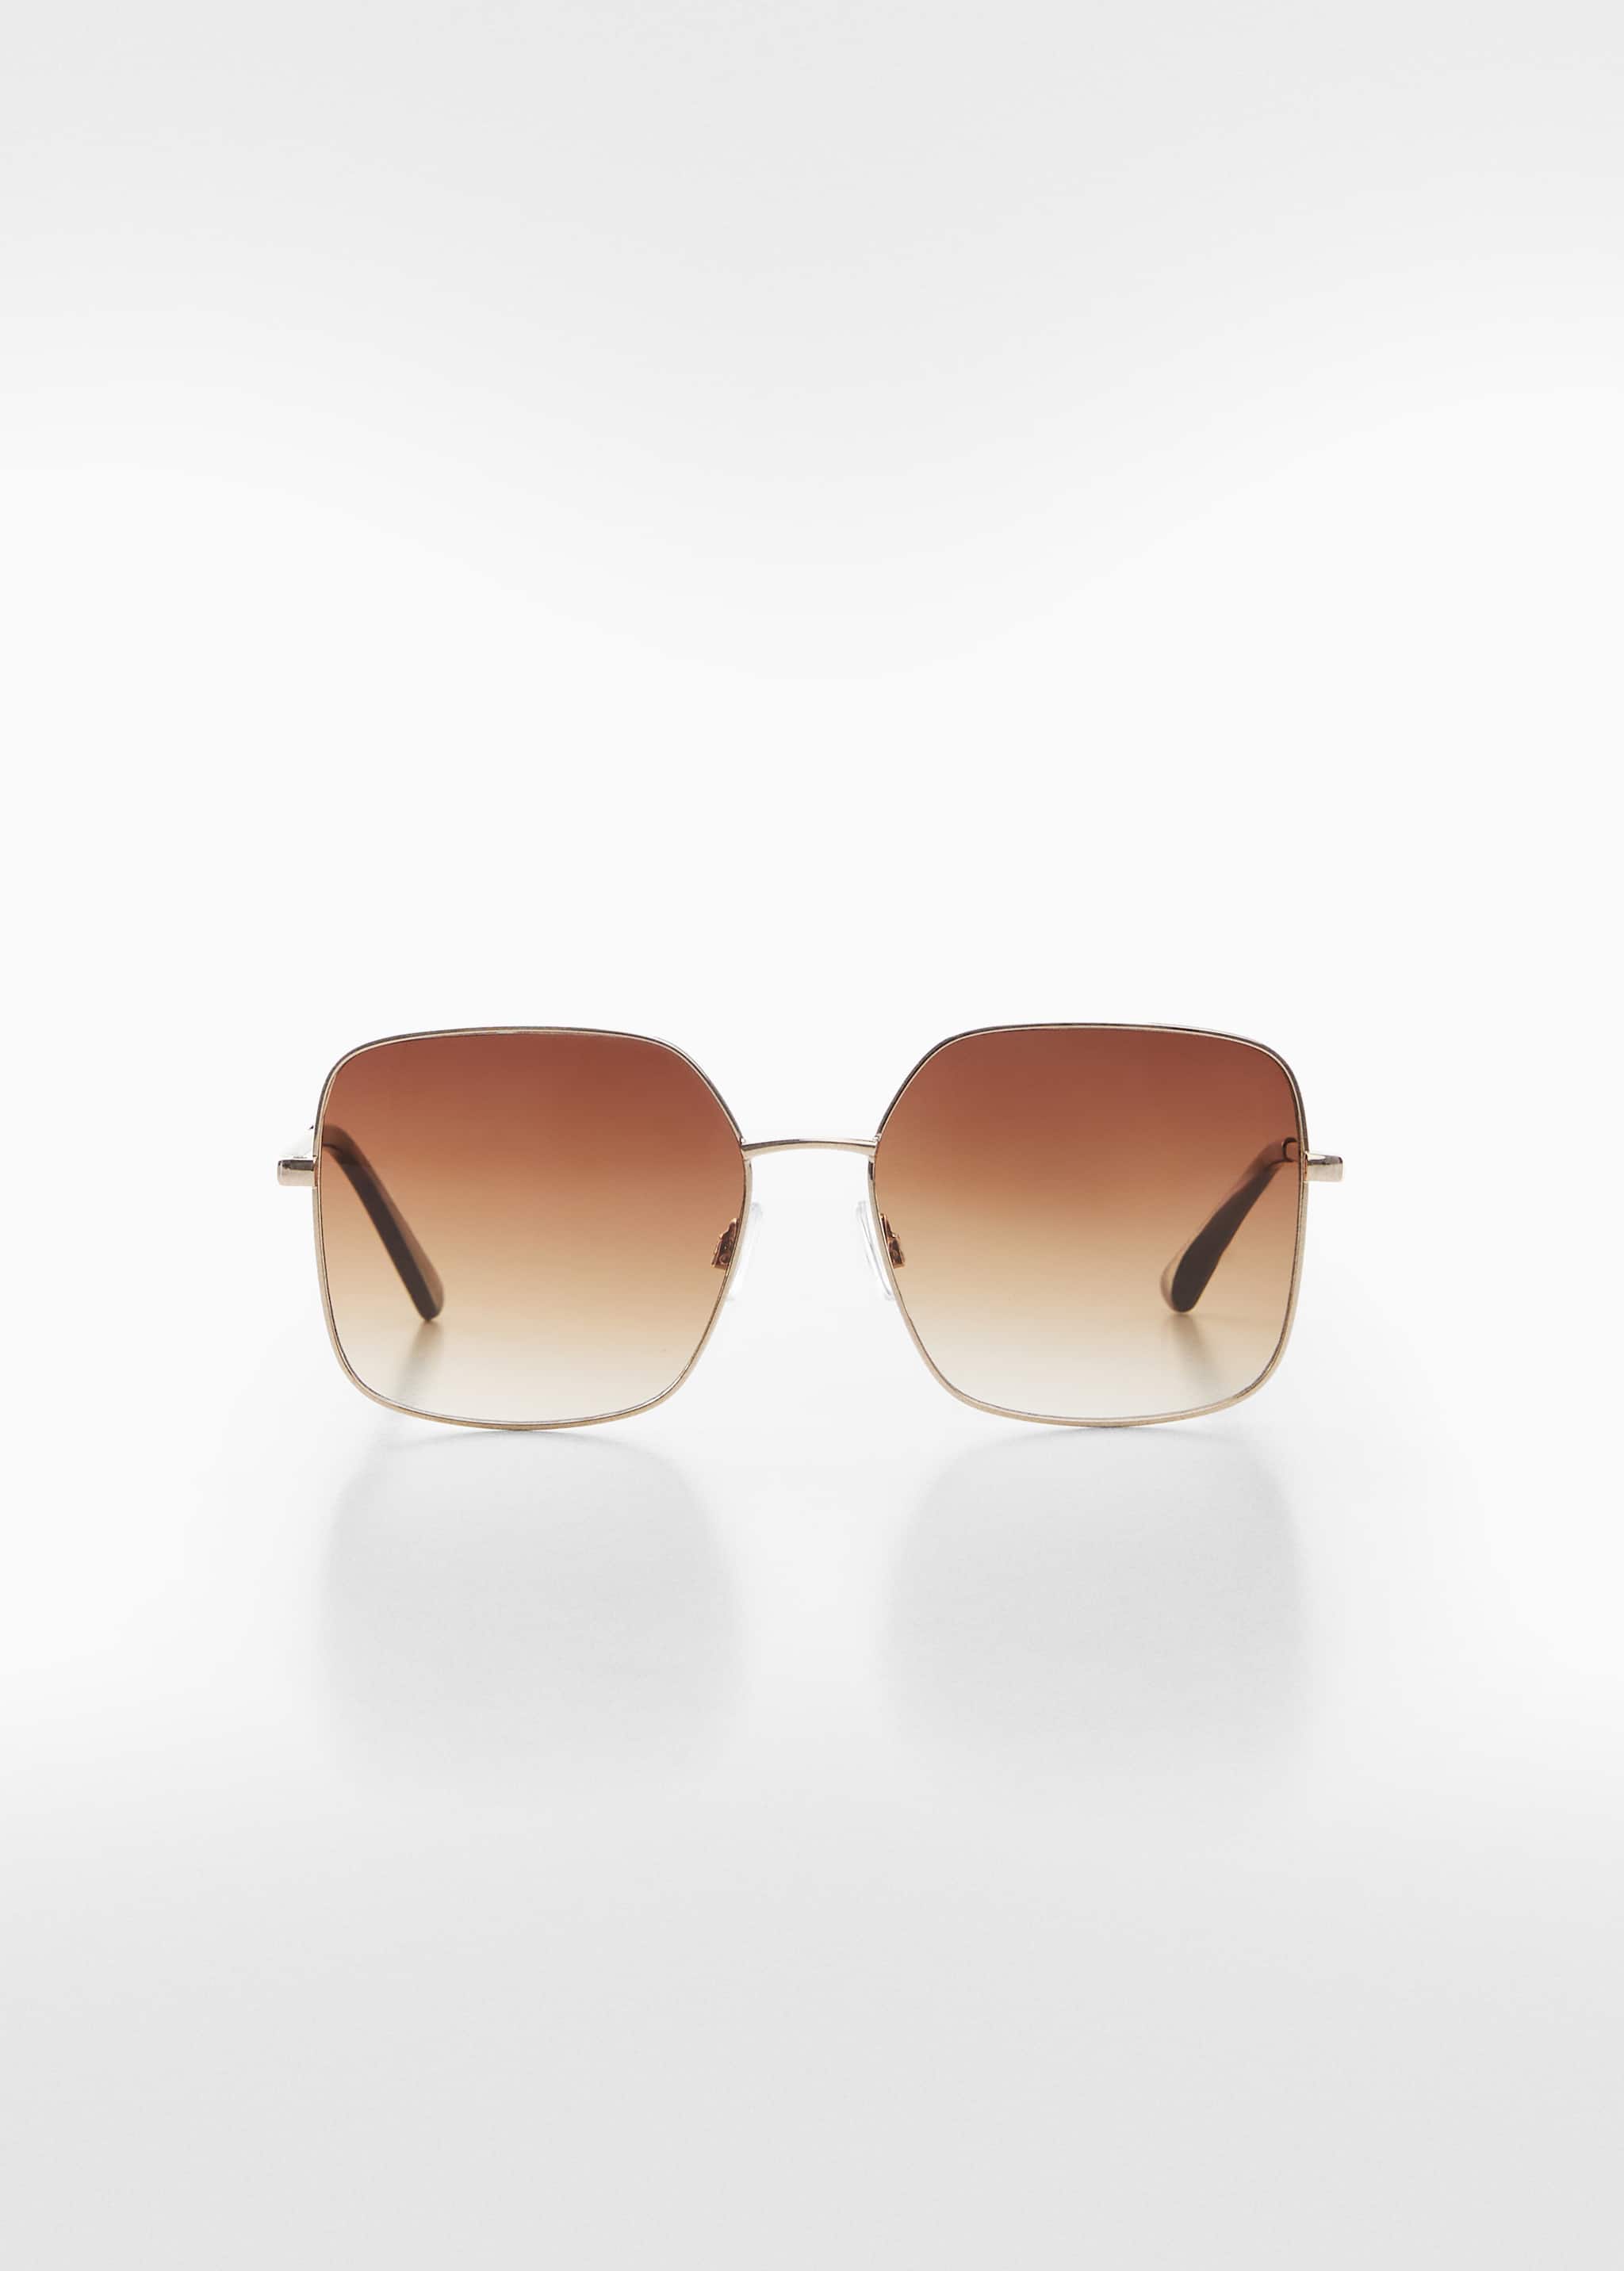 Square metallic frame sunglasses - Article without model